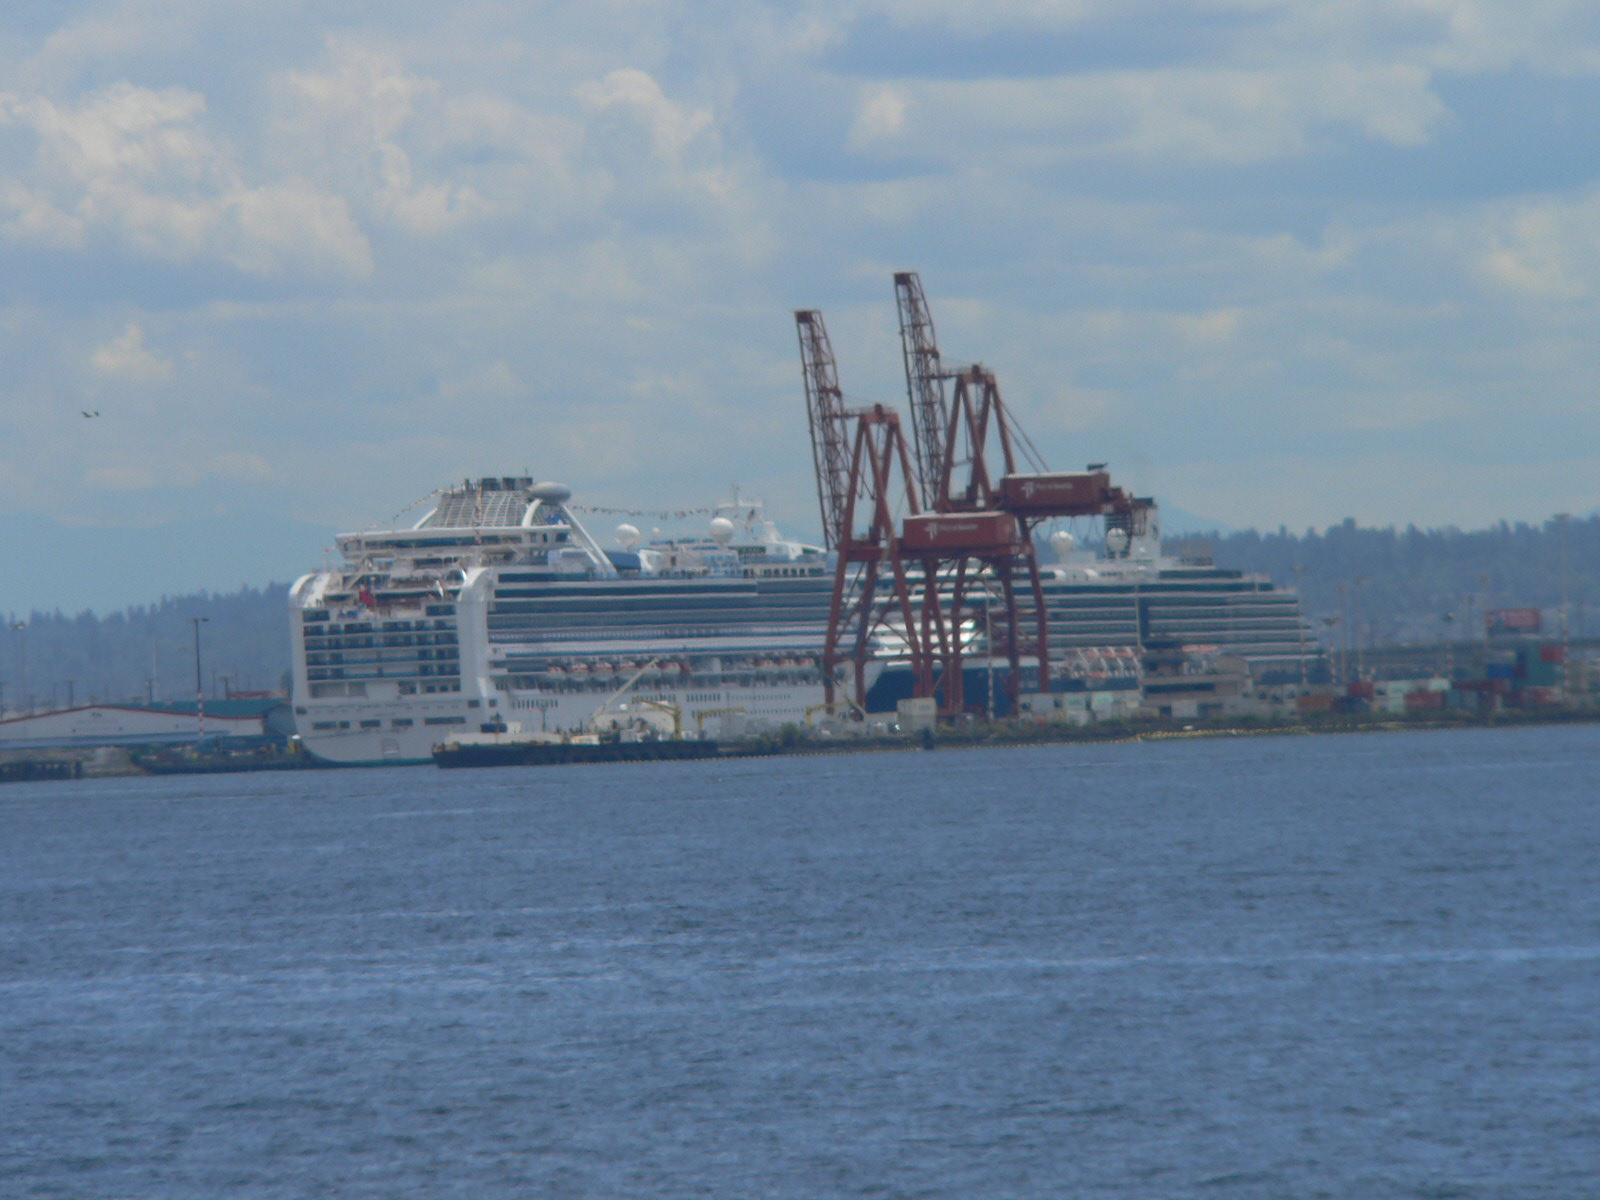 Many cruise ships stop by Seattle